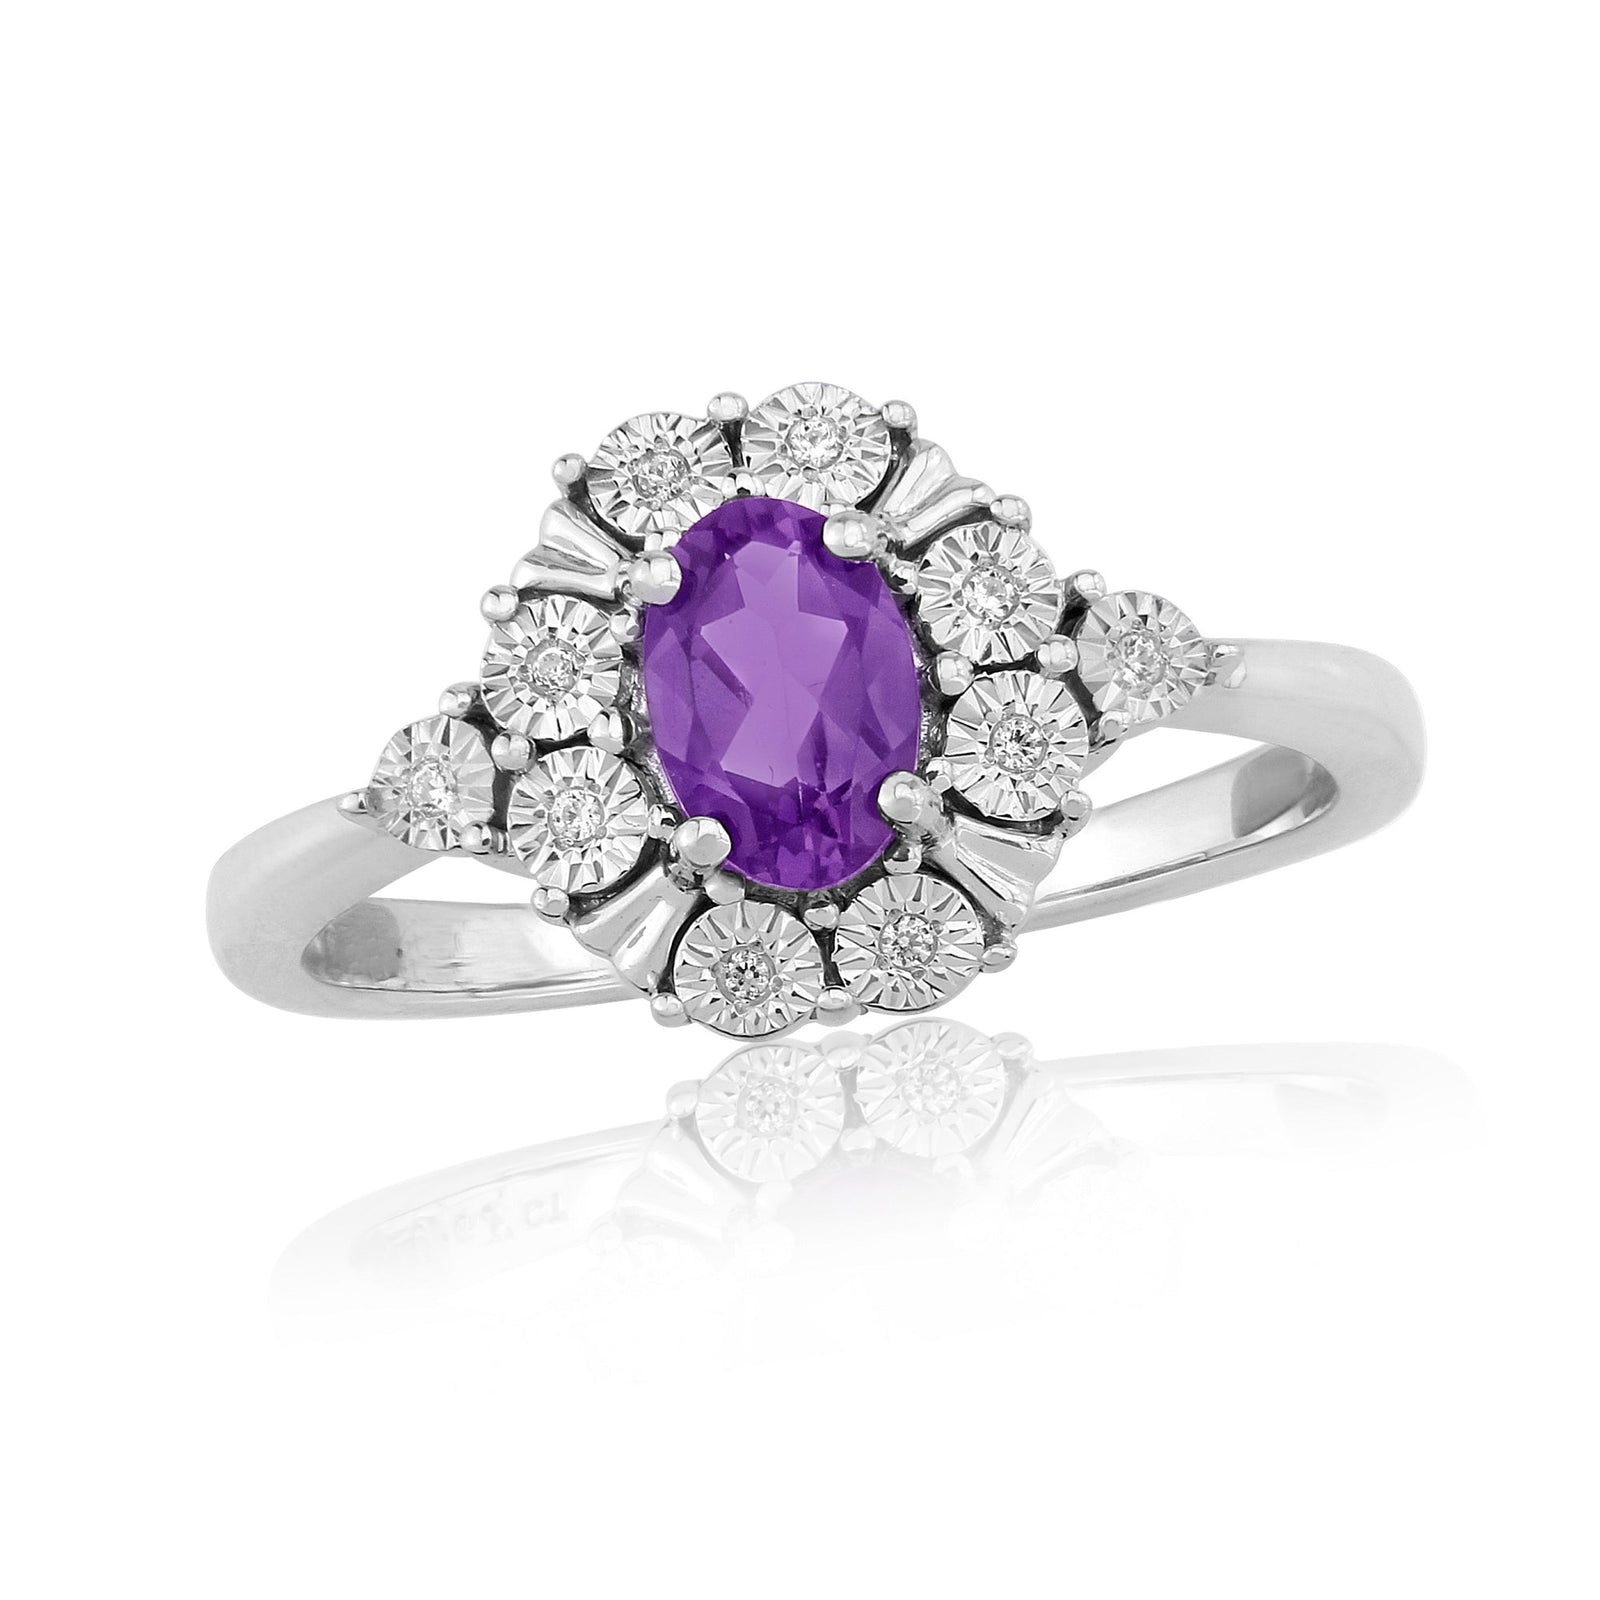 9ct white gold 6x4mm oval amethyst & miracle plate diamond cluster ring 0.03ct